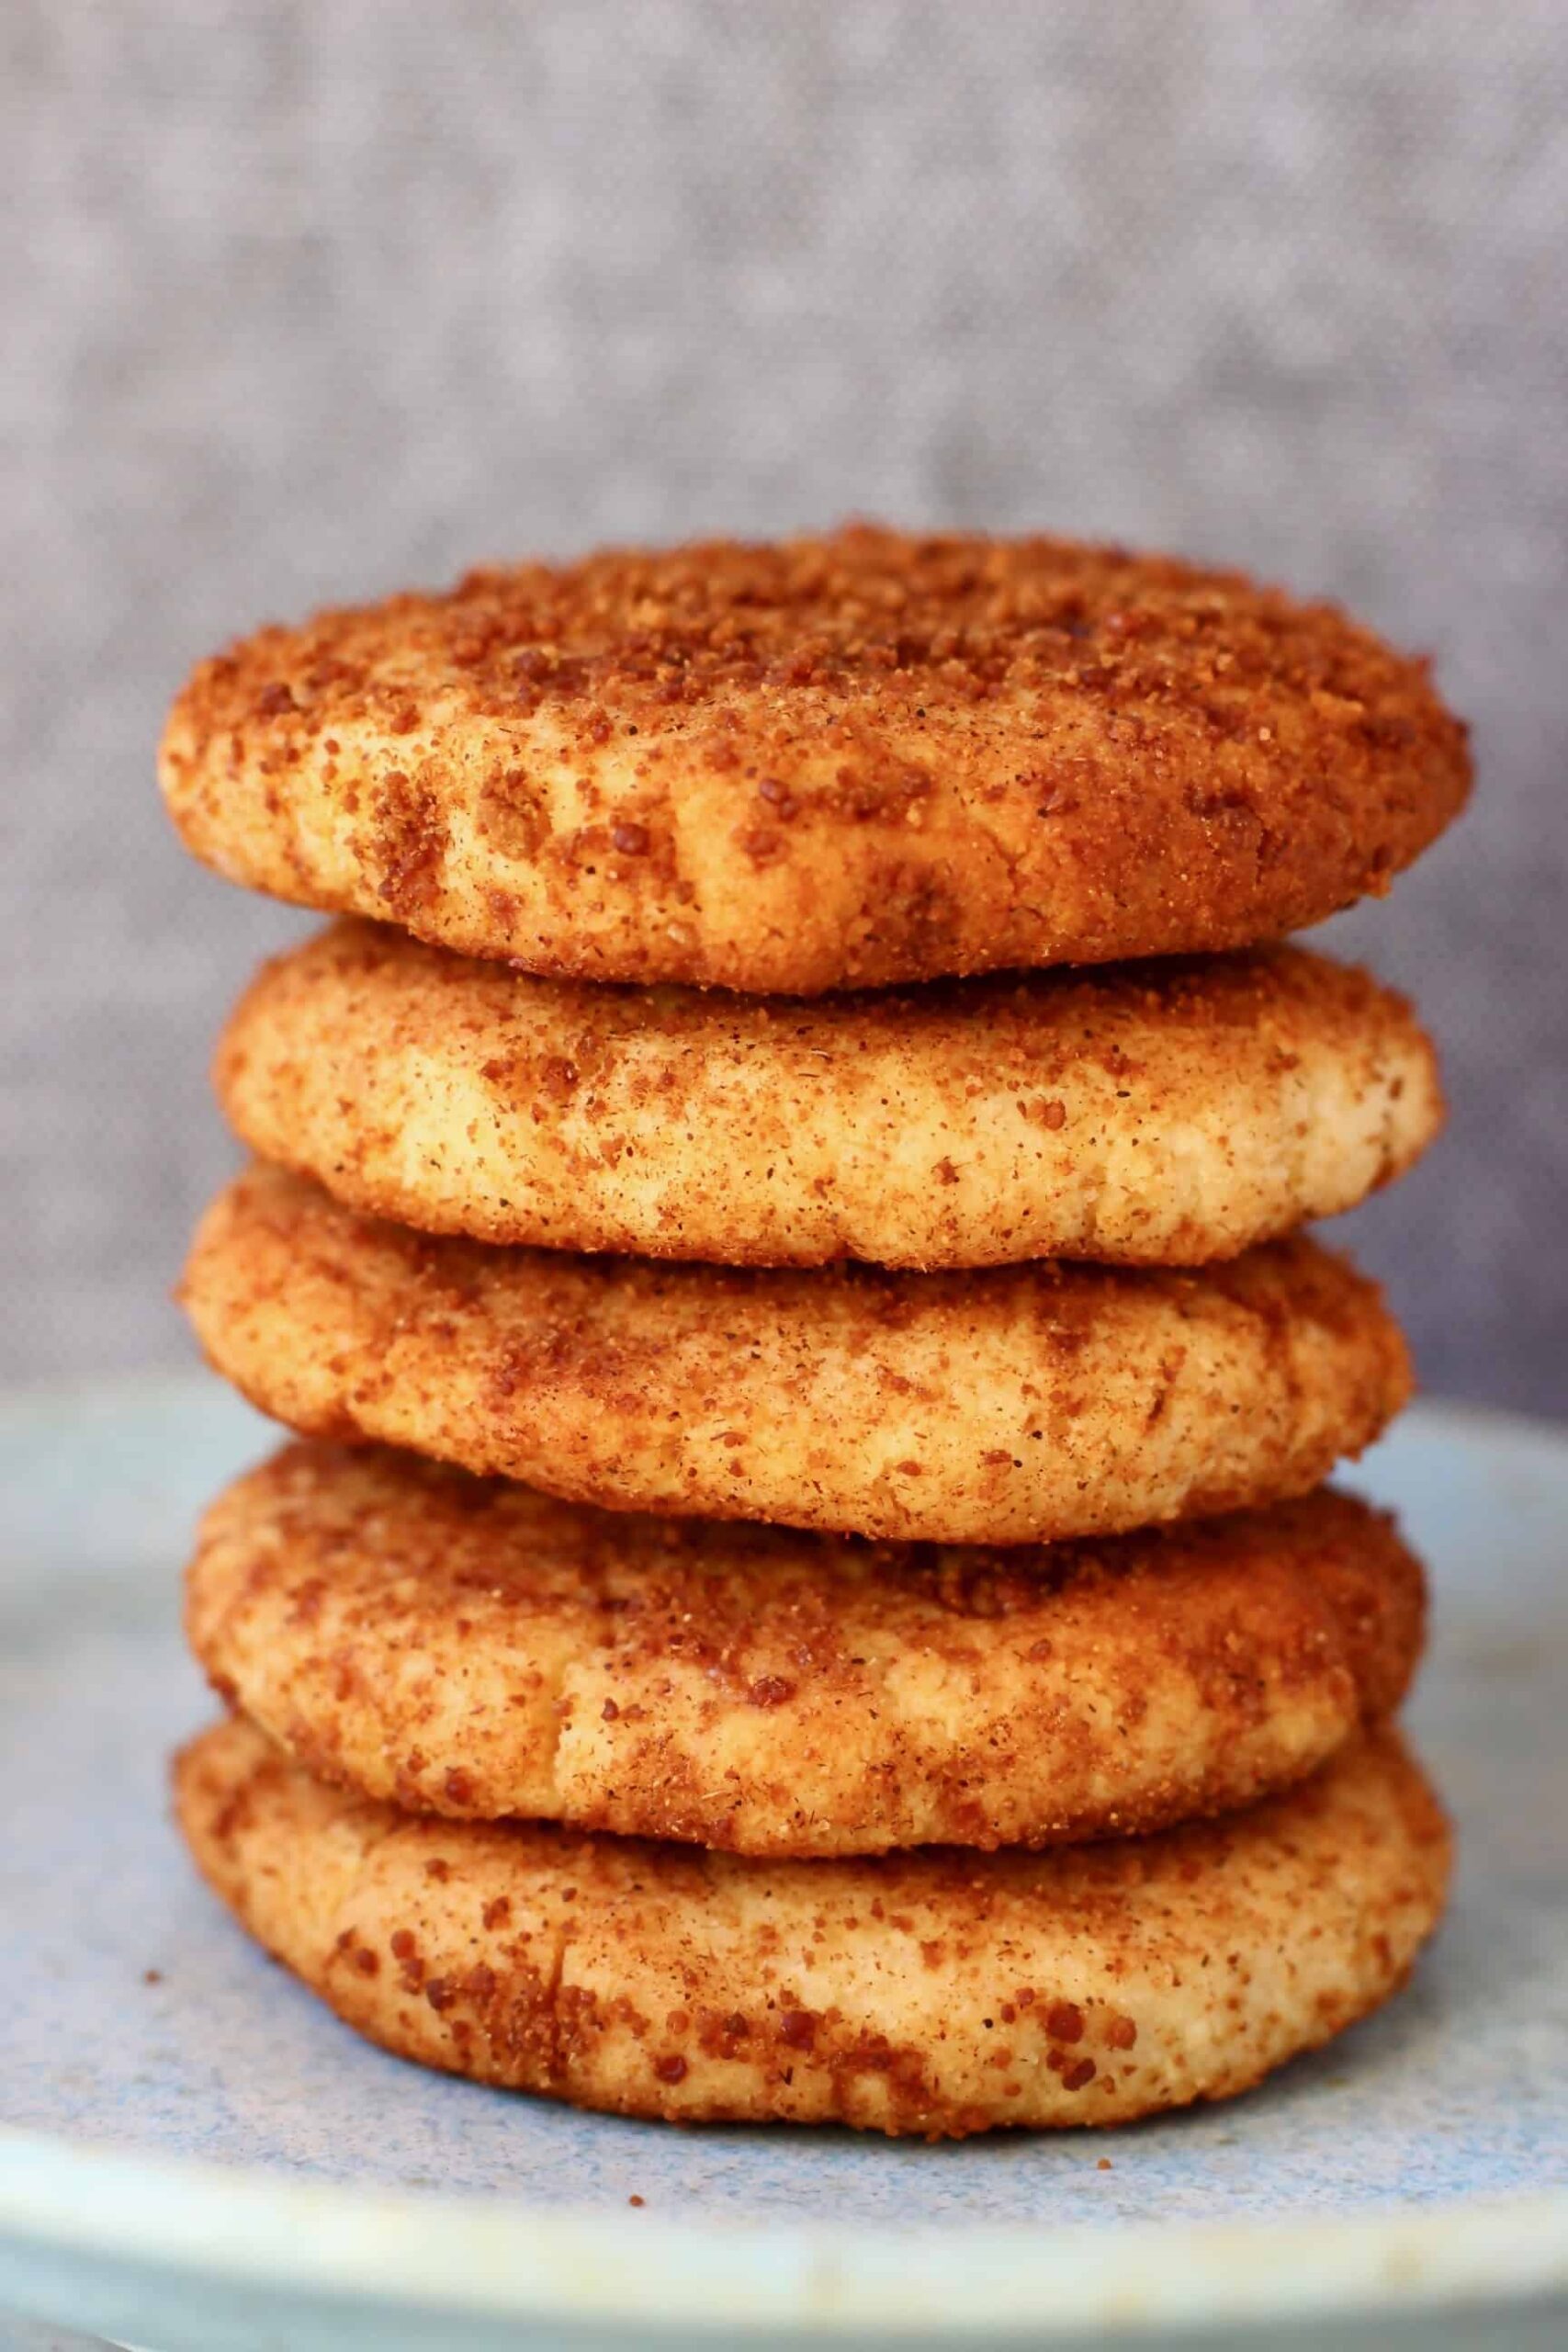 Photo of five cookies coated in brown cinnamon sugar stacked on top of each other on a light blue plate against a grey background